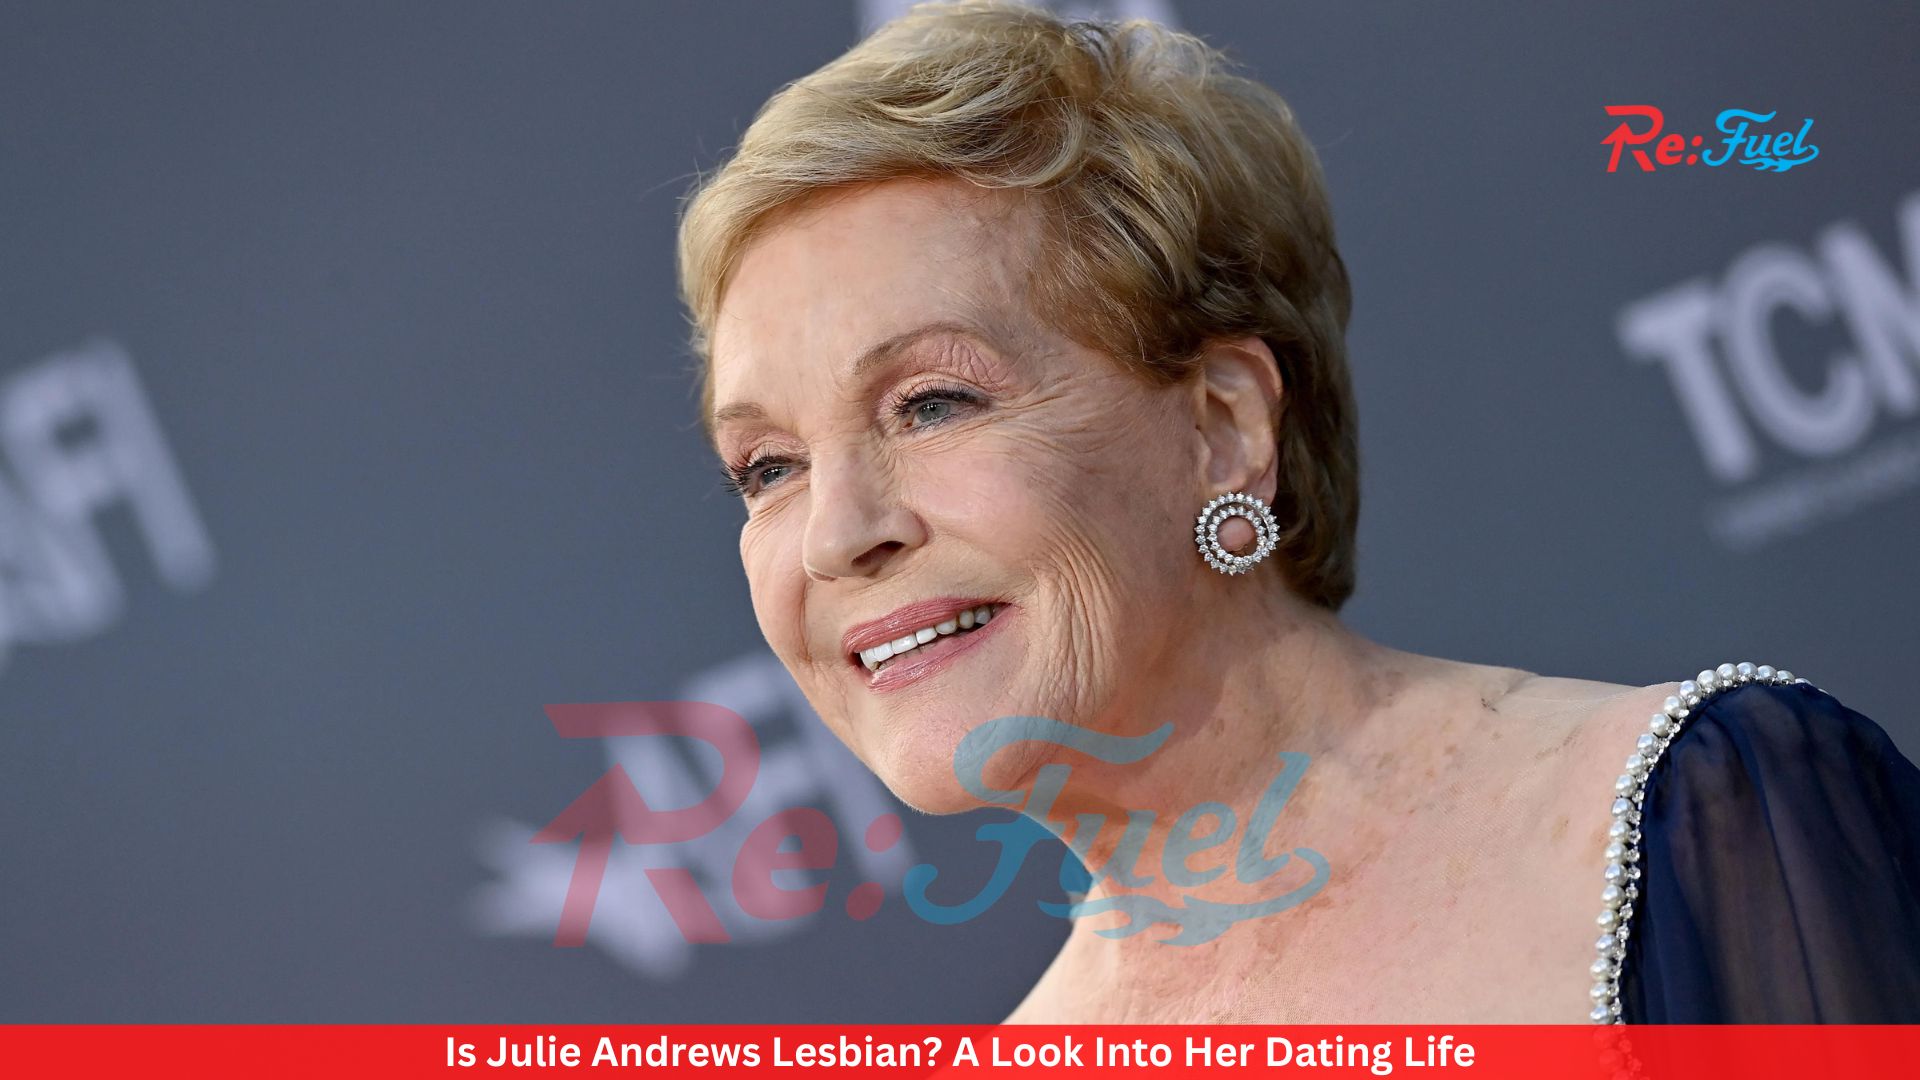 Is Julie Andrews Lesbian? A Look Into Her Dating Life